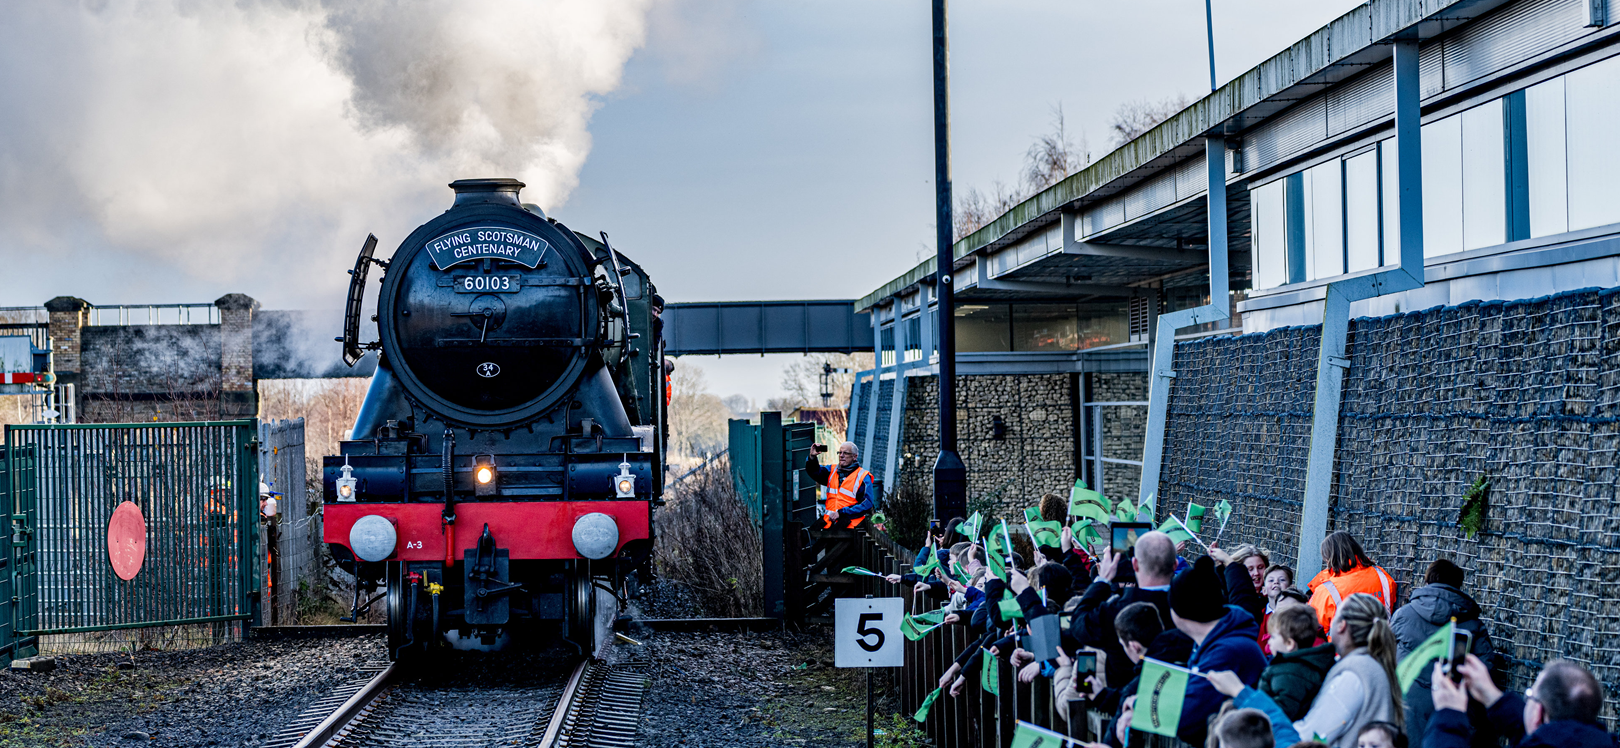 The Flying Scotsman at Locomotion